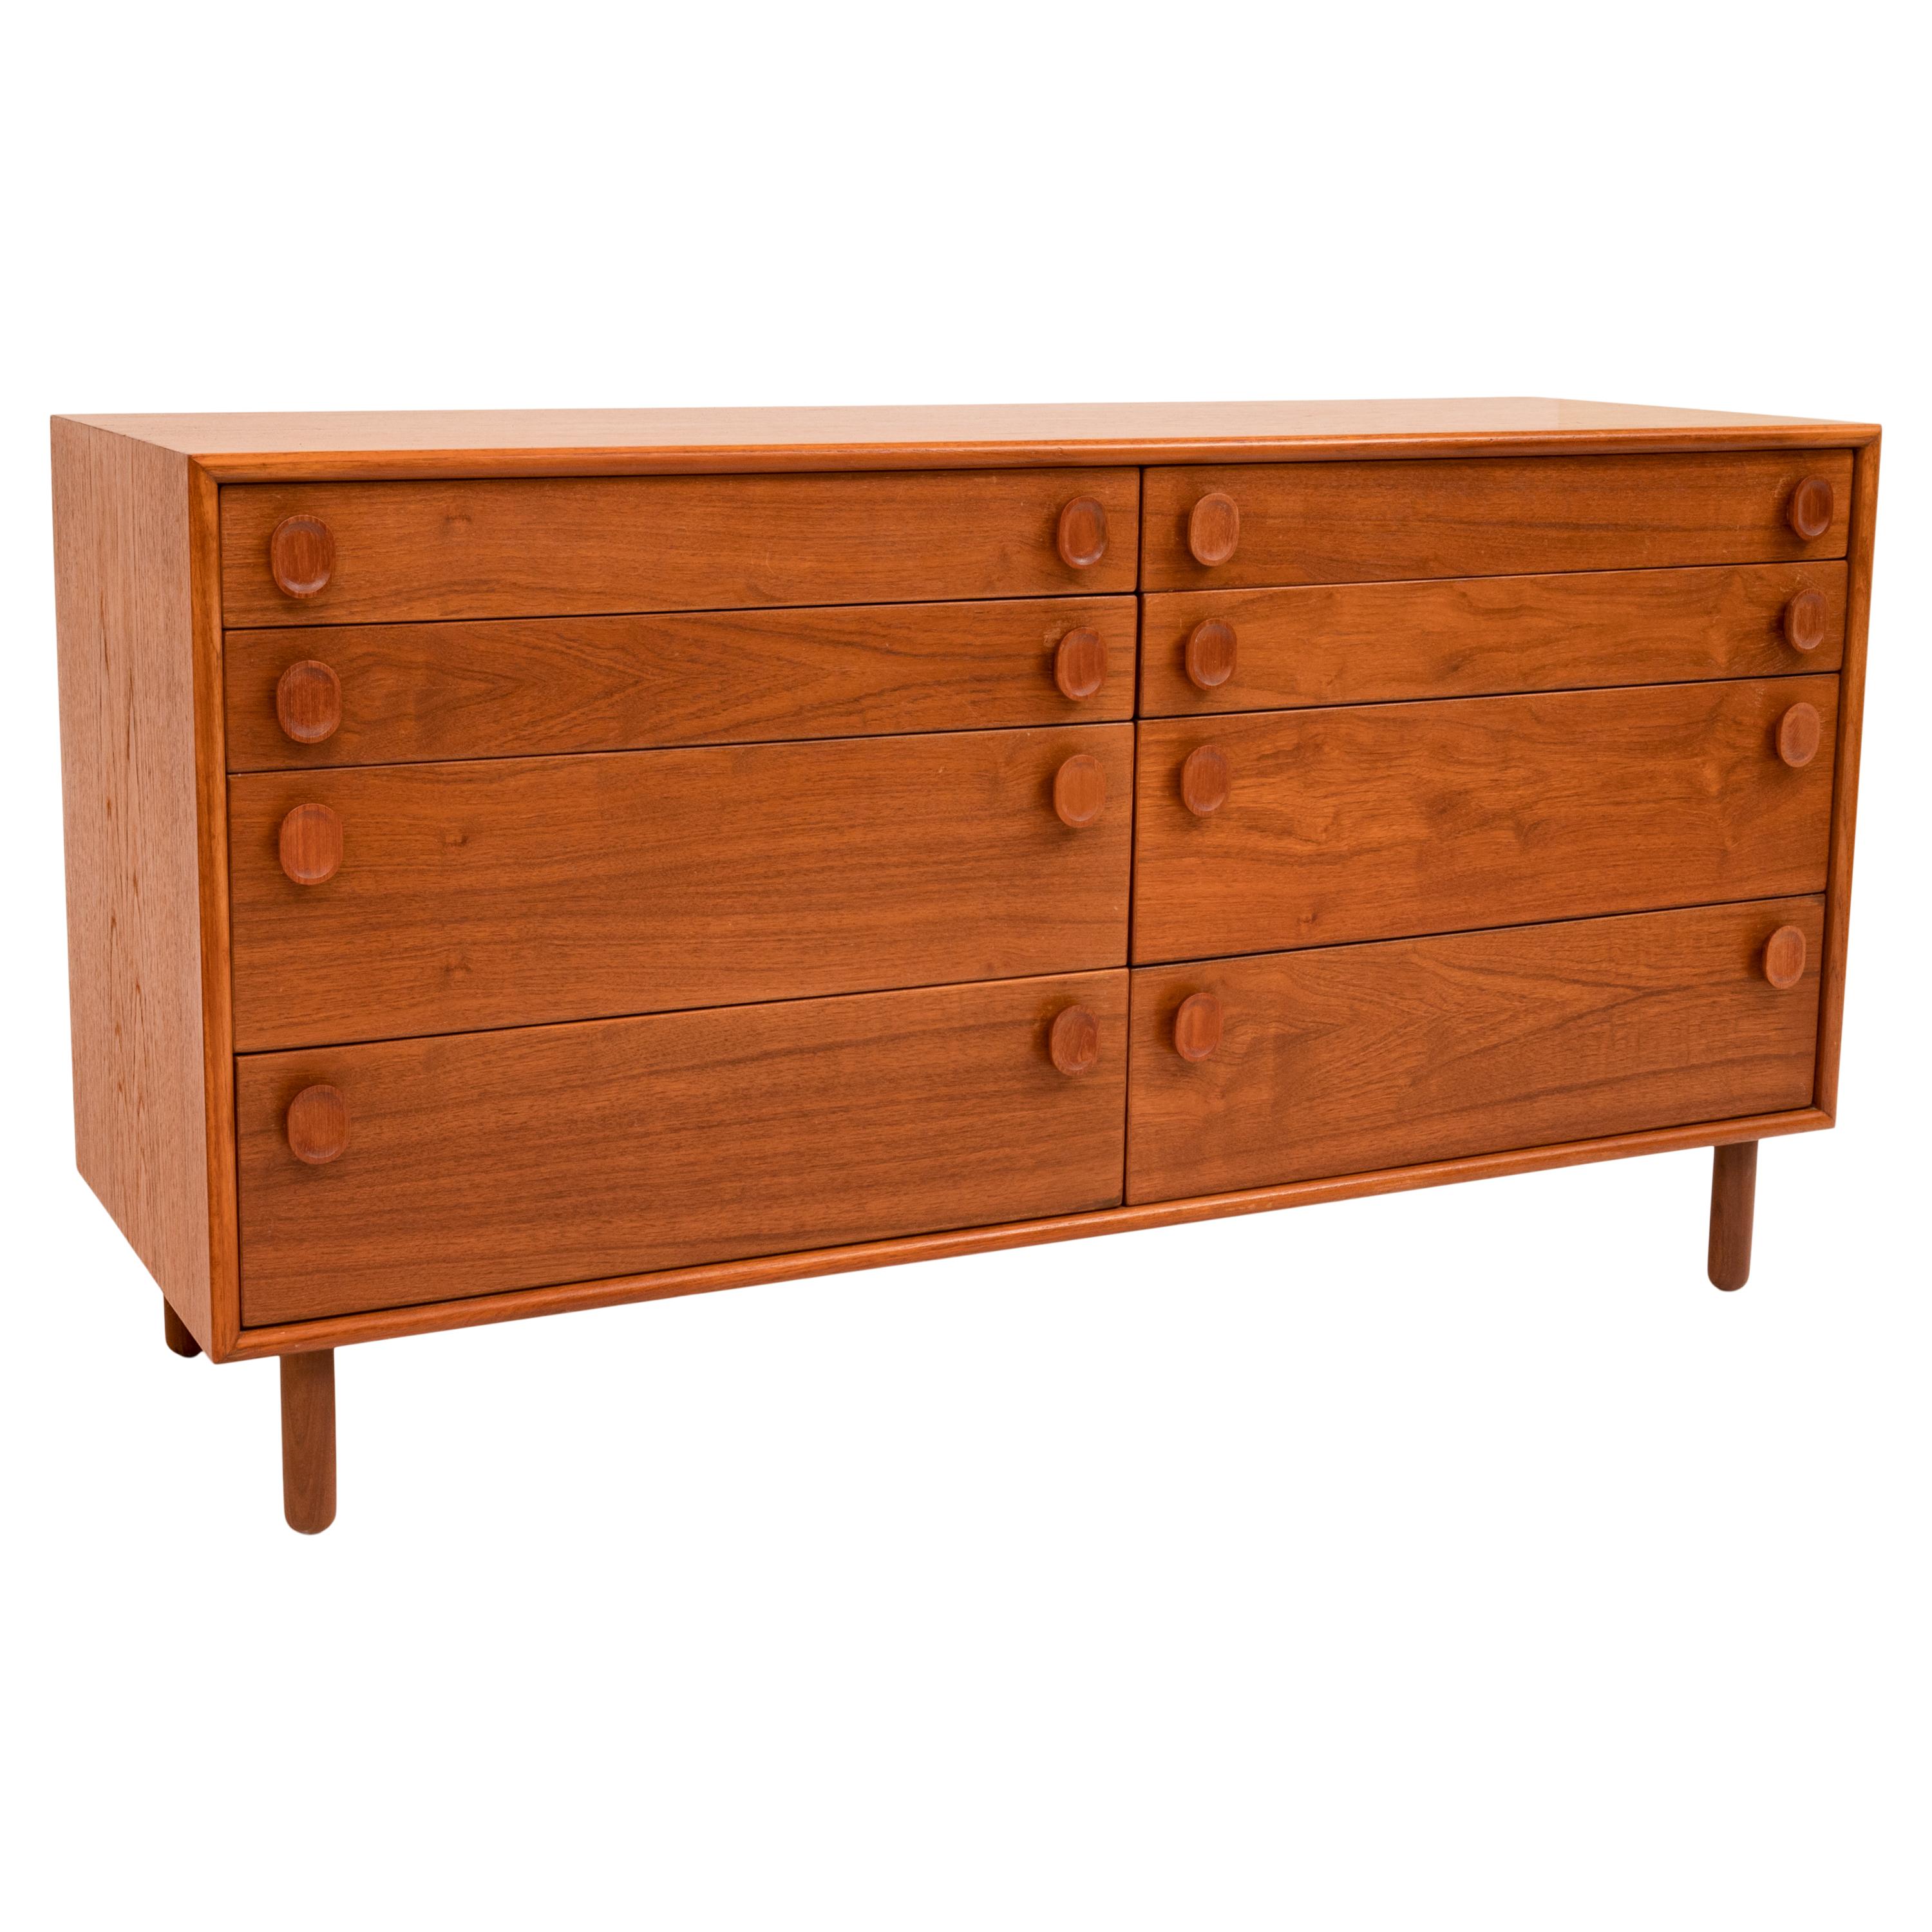 Late 1960s Mid-Century Modern teak 8 drawer double chest designed by Peter Liley, for Meredew furniture, 1969.
There were 4 different models of chests in the range which was imaginatively called ” New Teak Bedroom ”, designed and then produced in